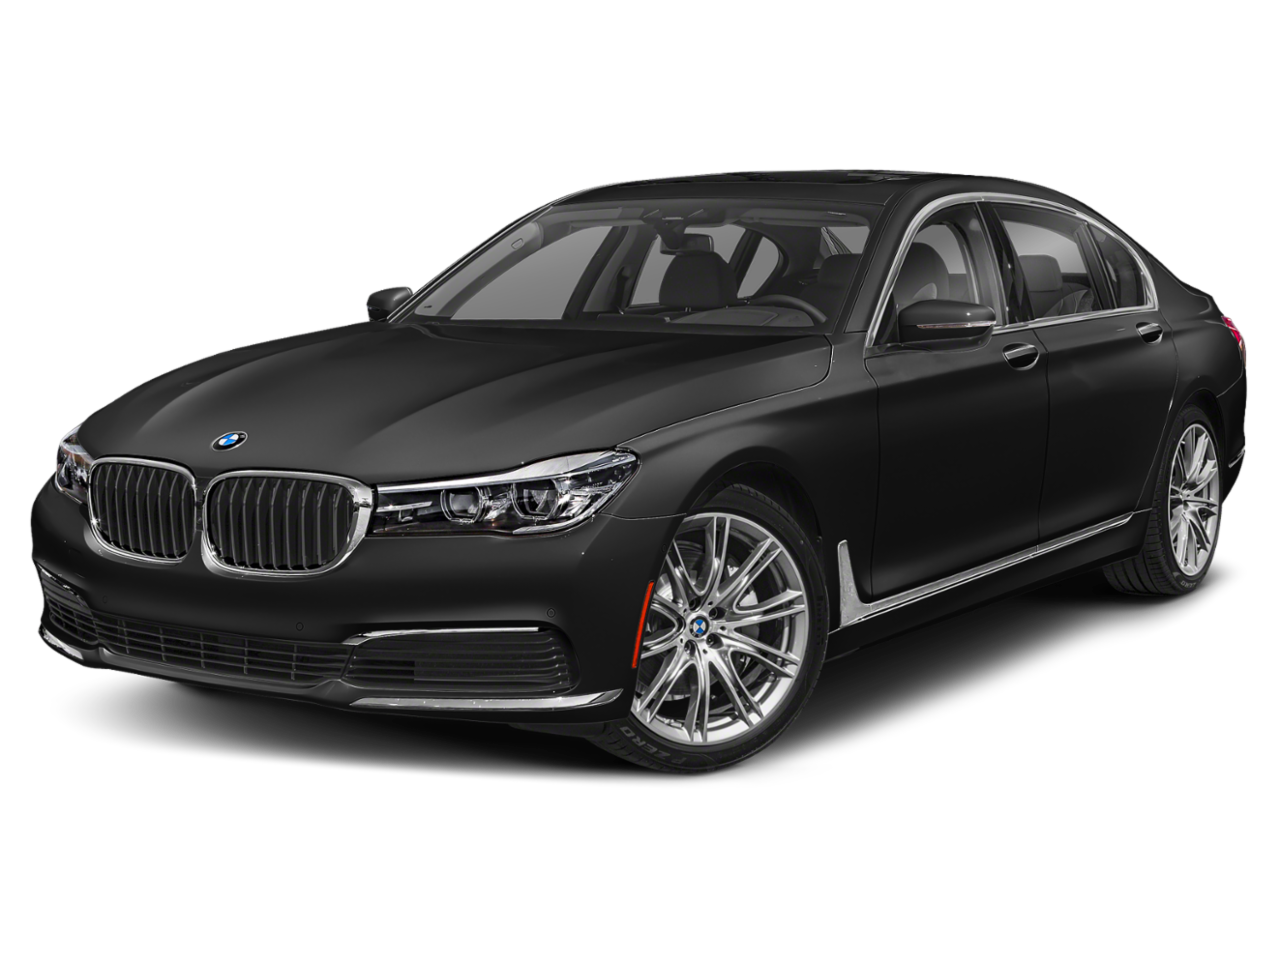 New 2019 BMW 740i xDrive Details from Garlyn Shelton Auto Group's